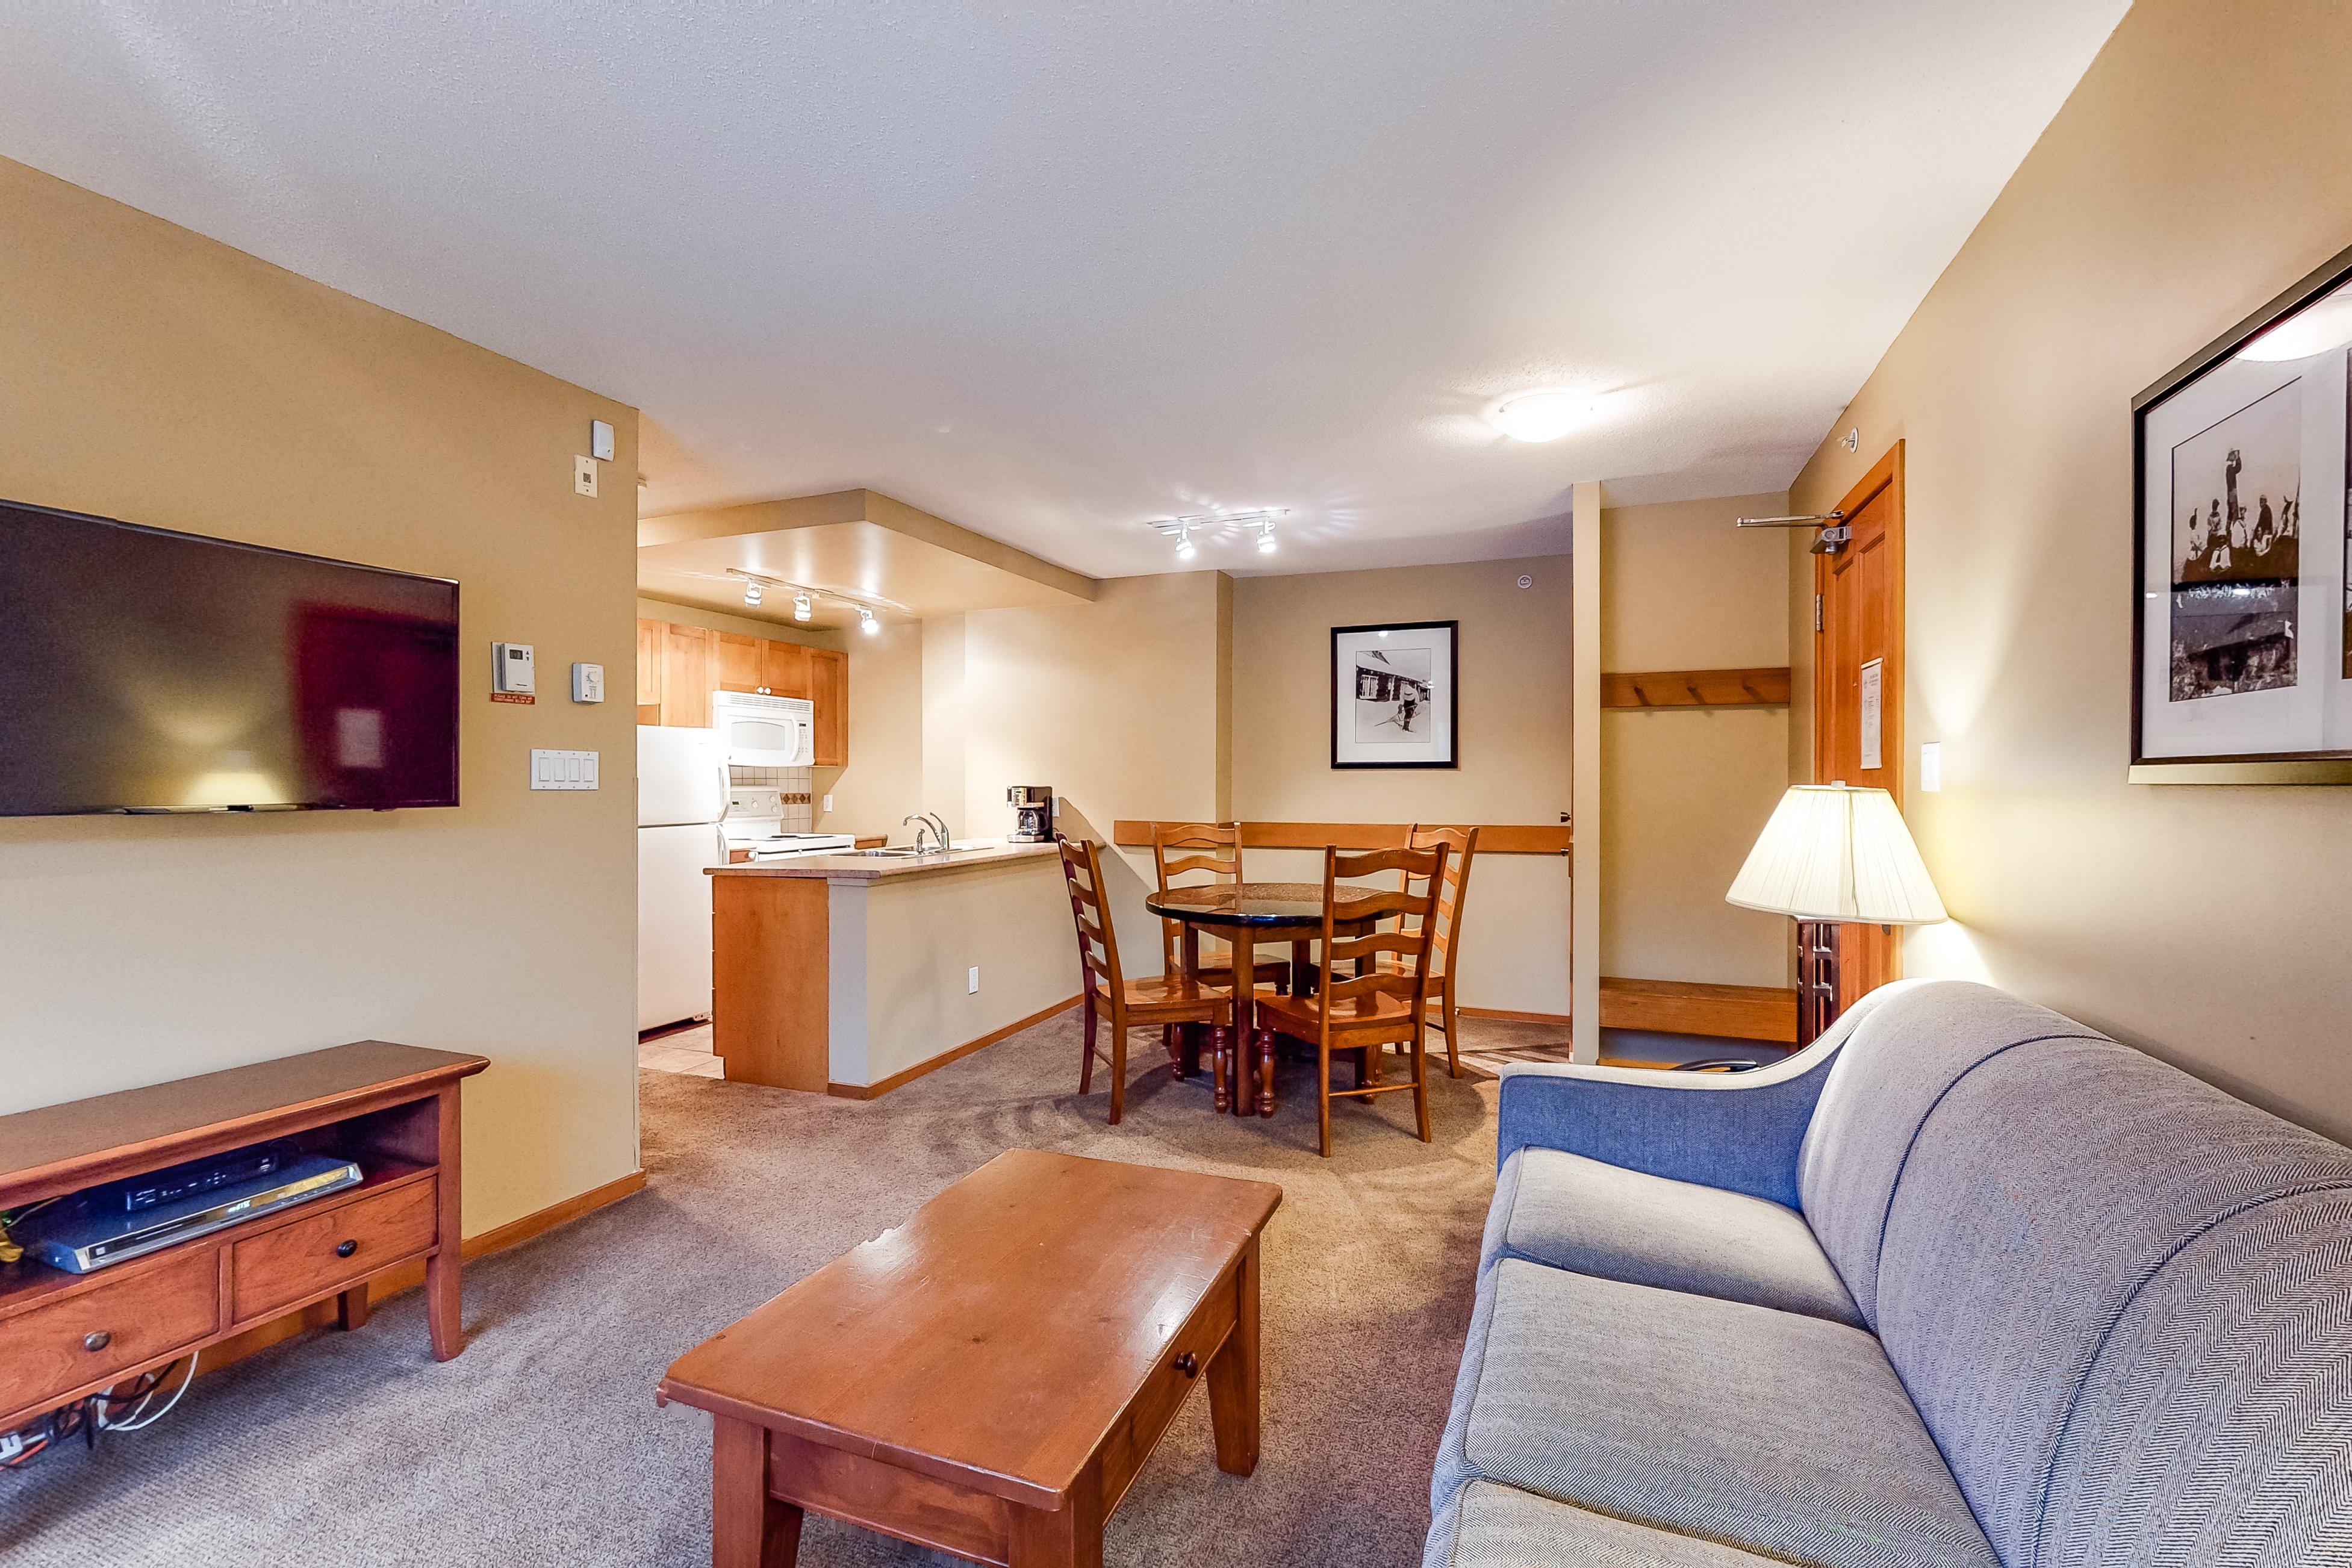 Property Image 2 - Delightful Condo located near Whistler Village with shared Hot Tub